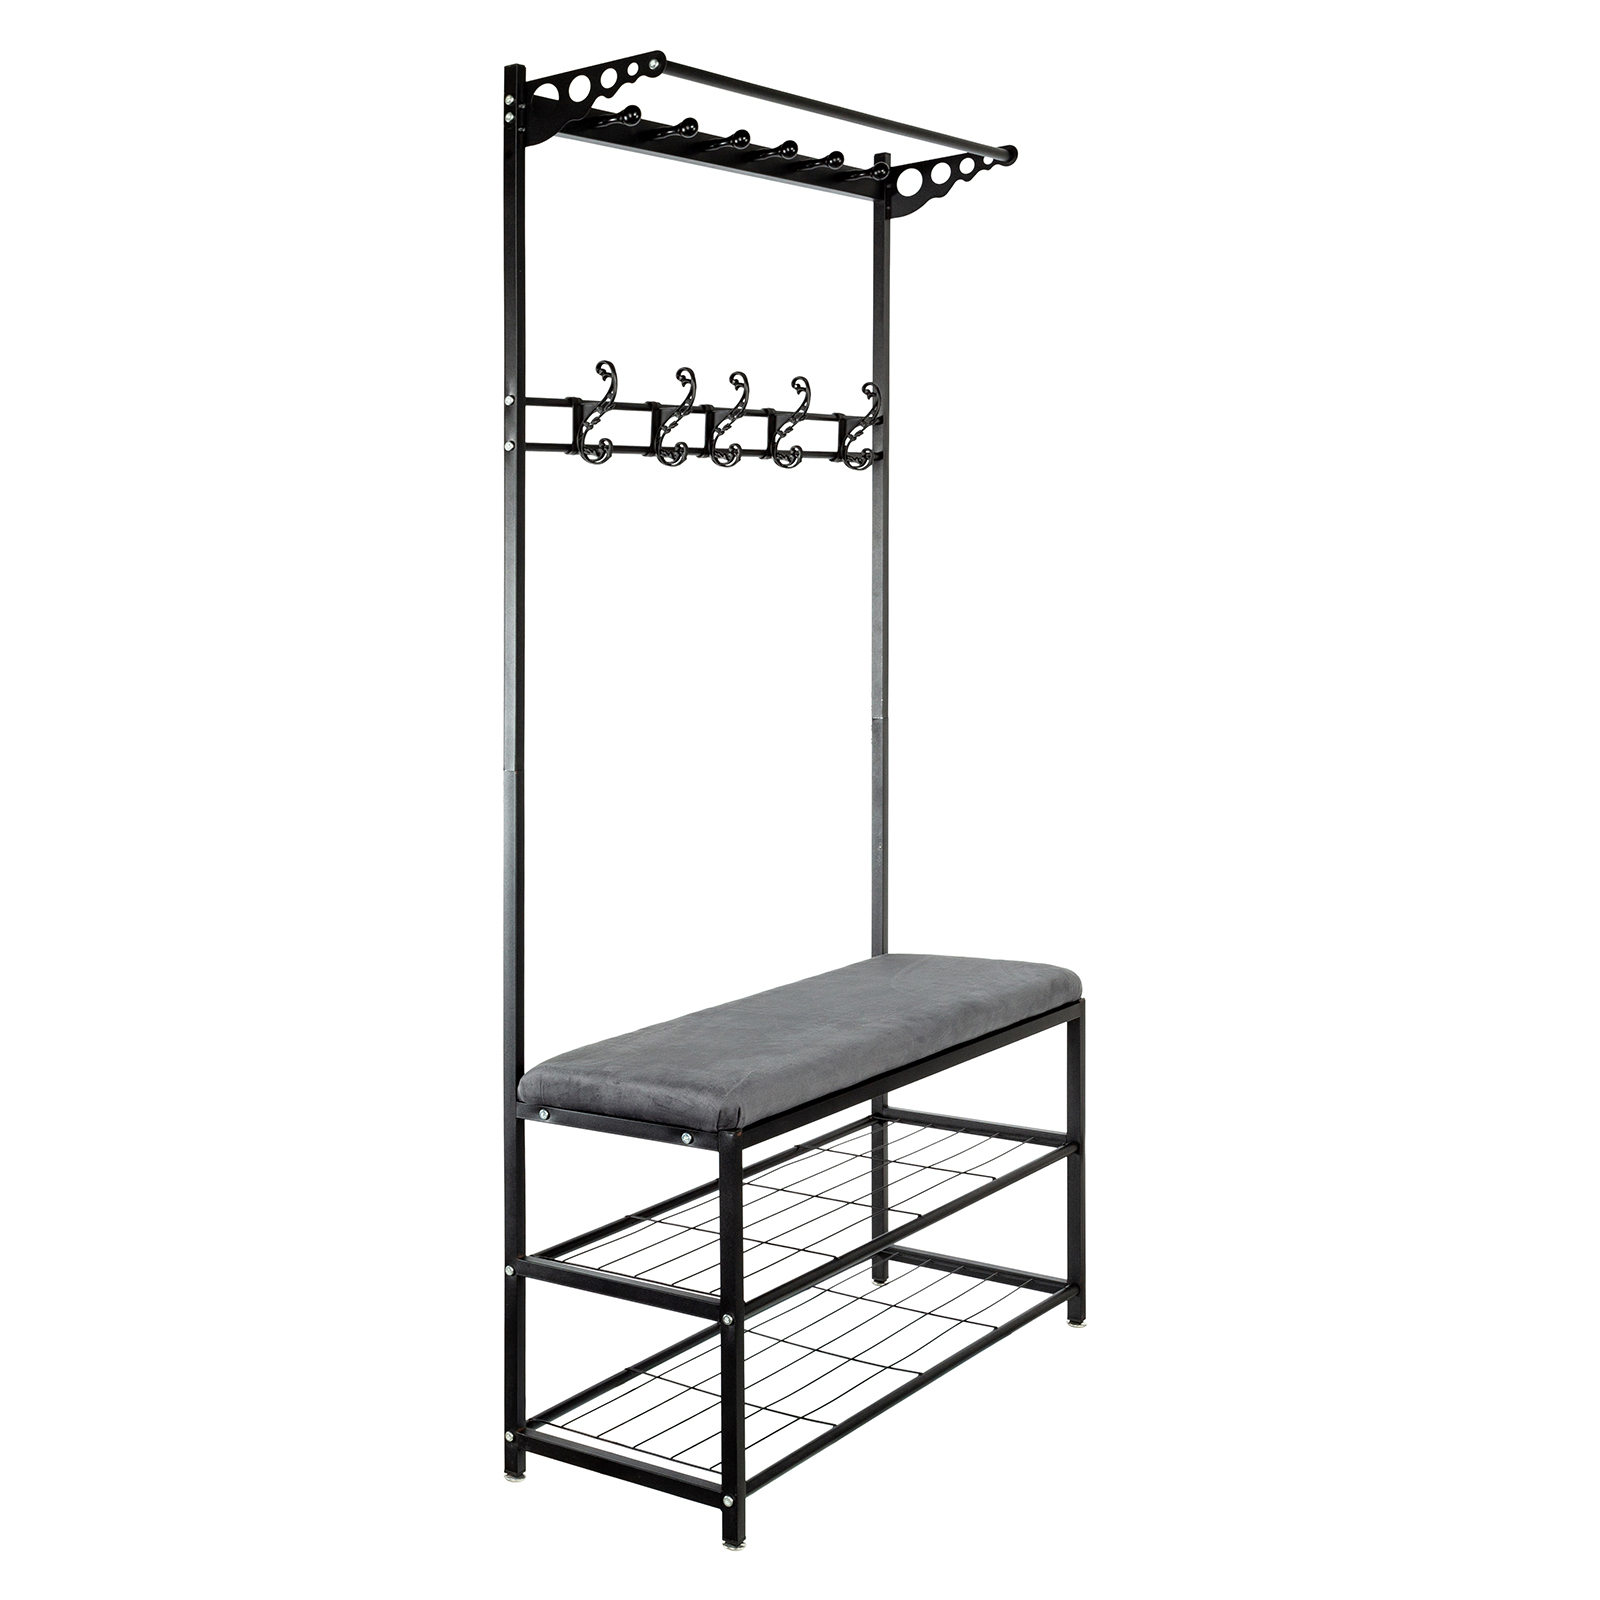 Second Life Marketplace - [satus Inc] Wall Mounted Shoe Rack (3 in 1)